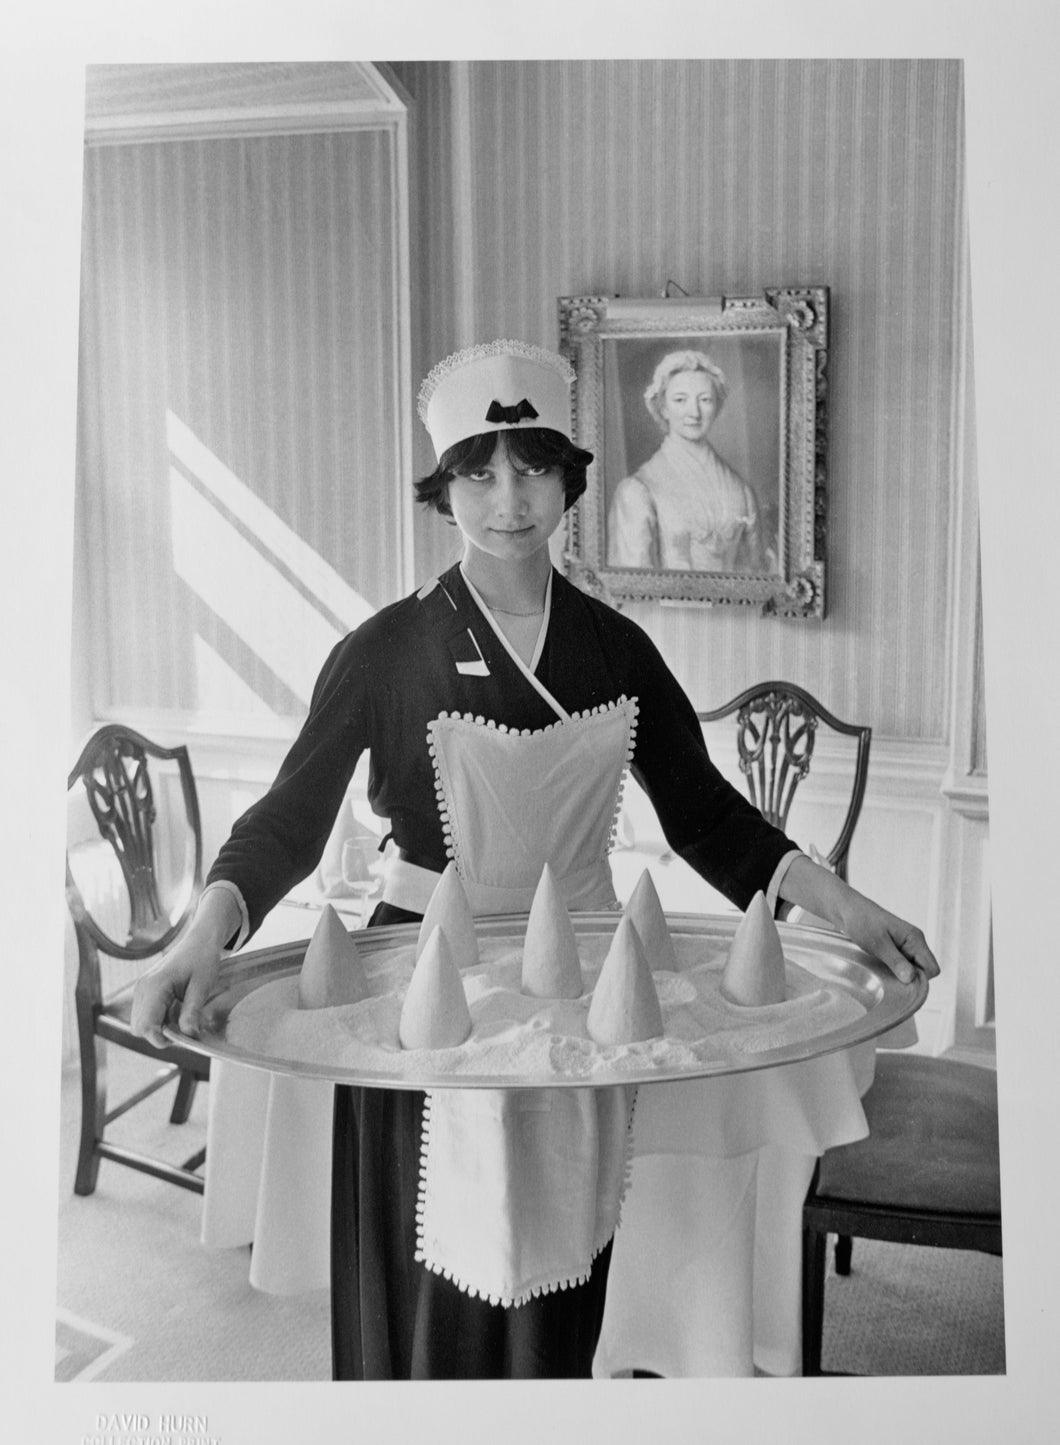 Untitled by David Hurn, Black-and-White Portrait Photography of Woman Dressed as French Maid.